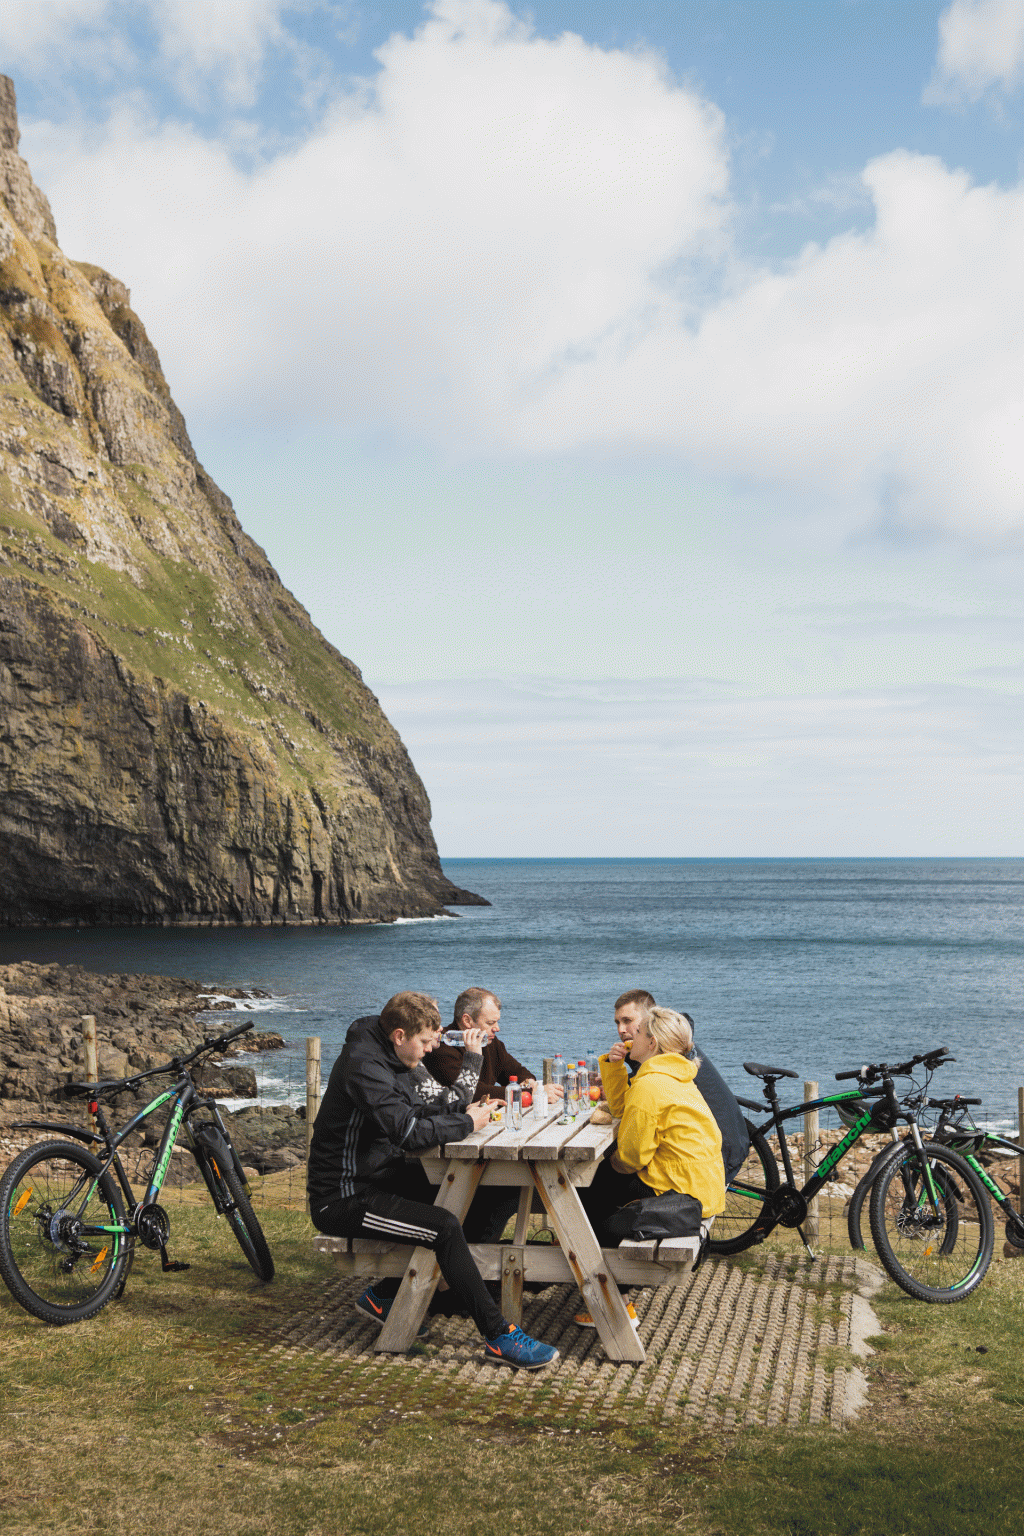 People on a bike trip in Suðuroy, Faroe Islands. Enjoying a nice lunch with a view of the sea. Taken by Kirstin Vang 